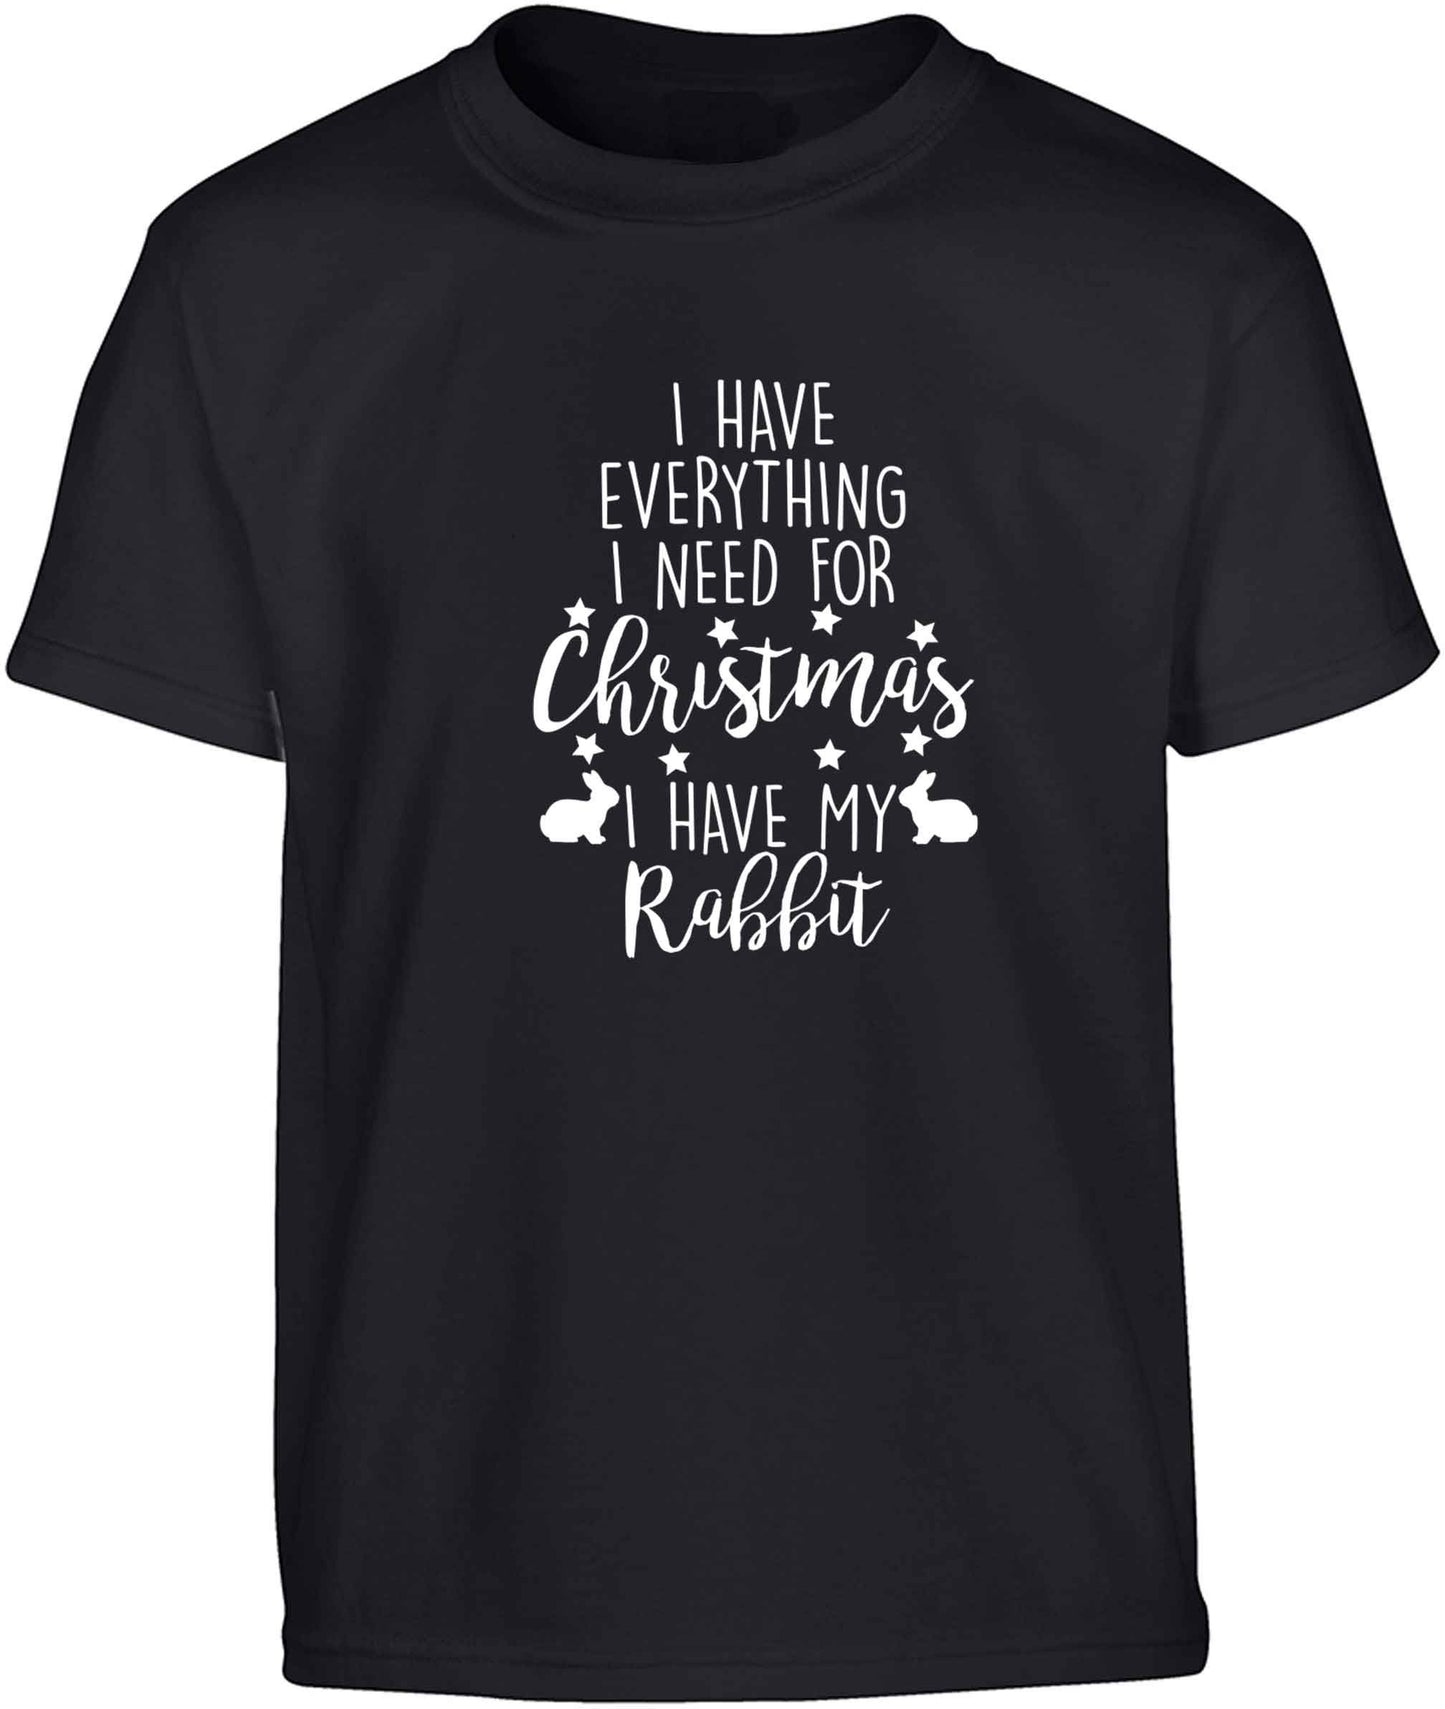 I have everything I need for Christmas I have my rabbit Children's black Tshirt 12-13 Years